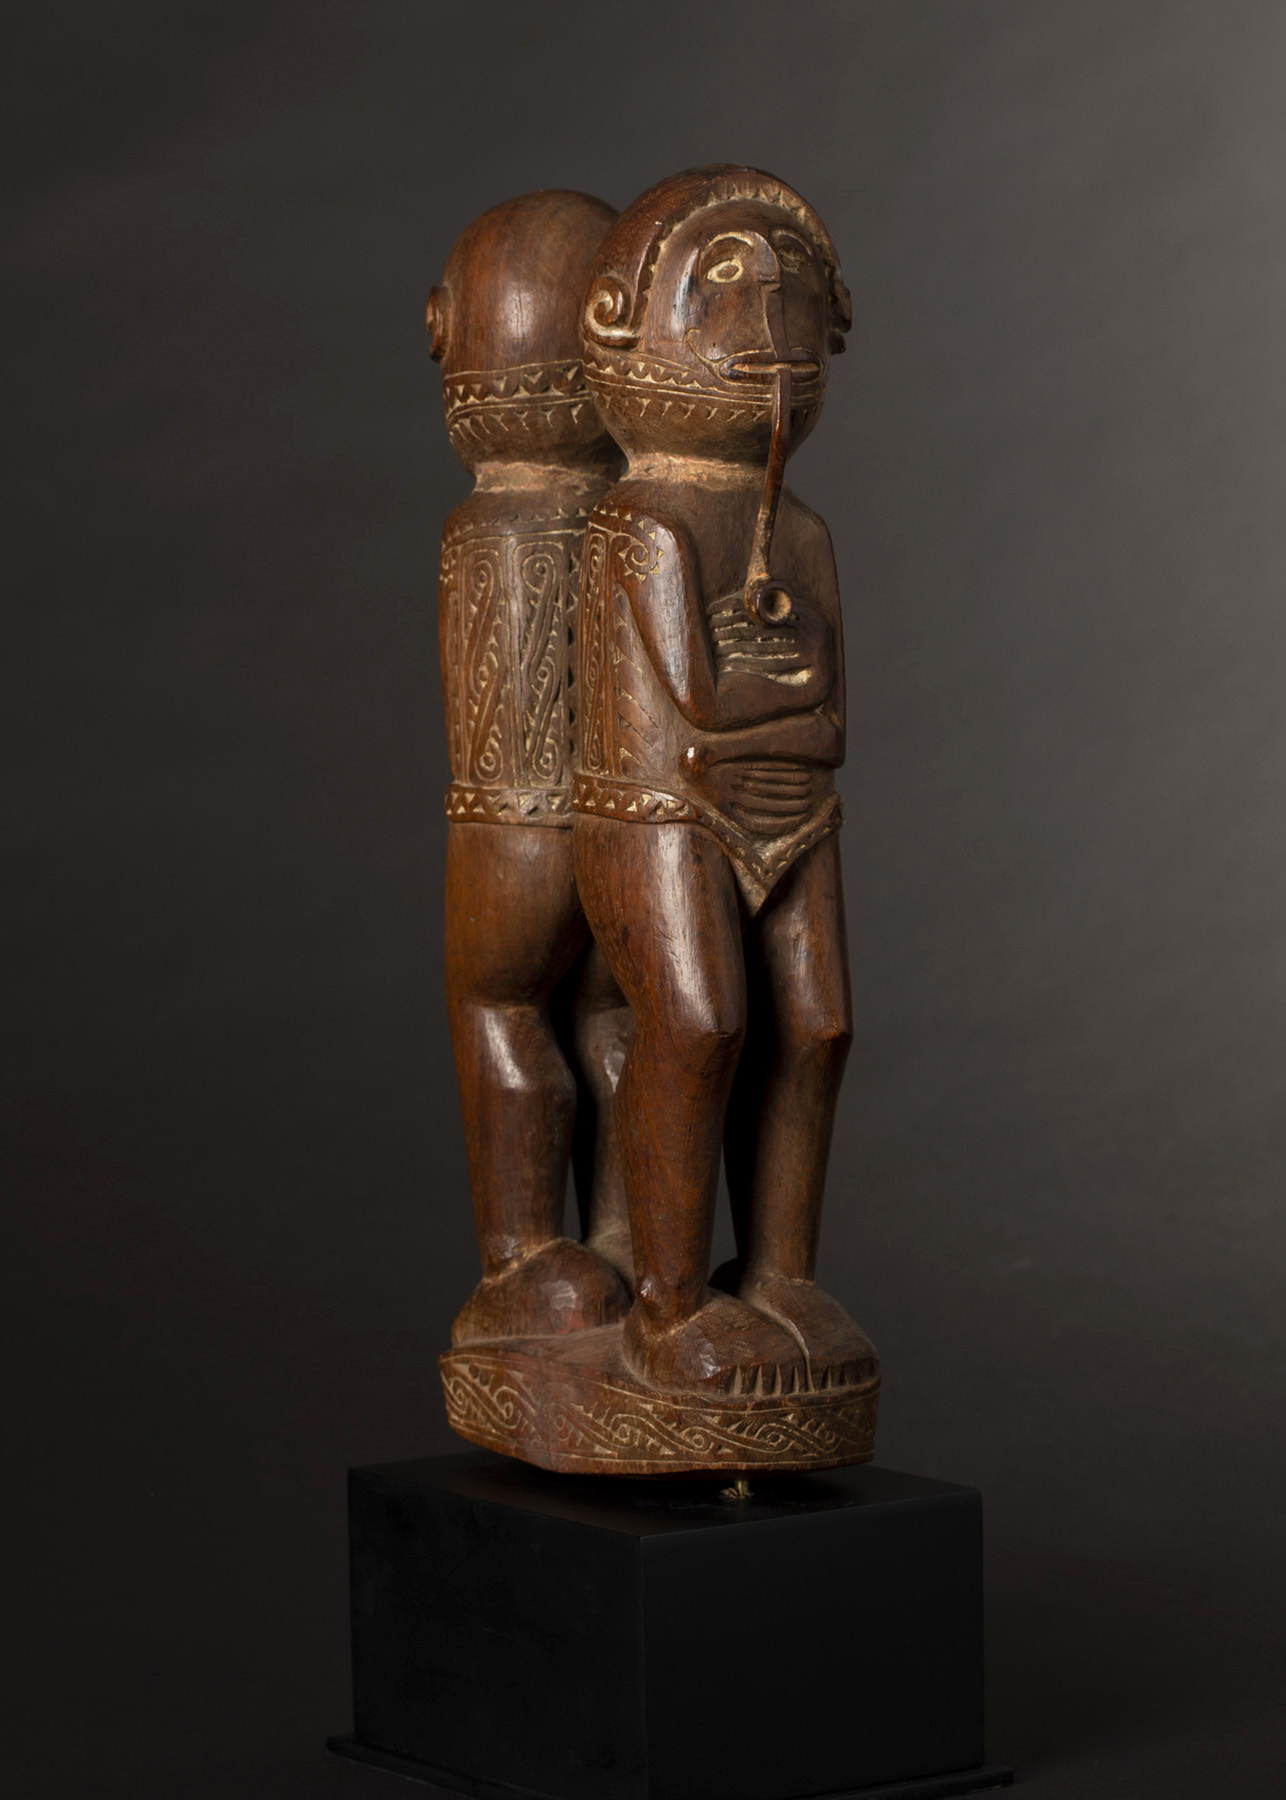 A Superb Old Massim Figure by Master Carver Banieva Milne Bay Province PNG 19th Century